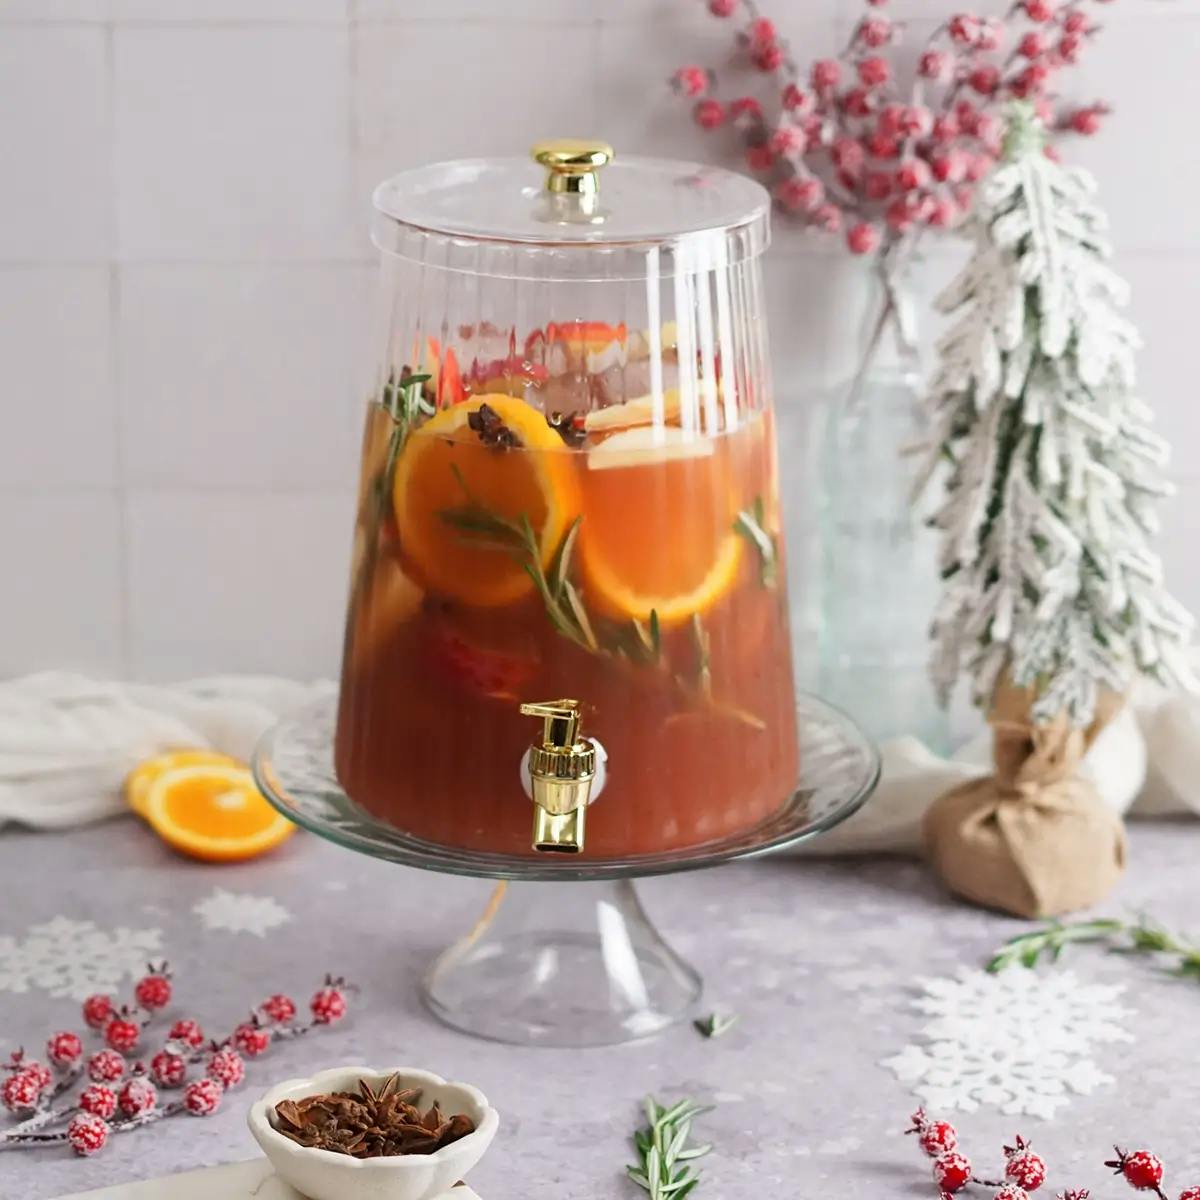 Cranberry juice and fruit in a large pitcher, ready to be made into a non-alcoholic holiday punch.